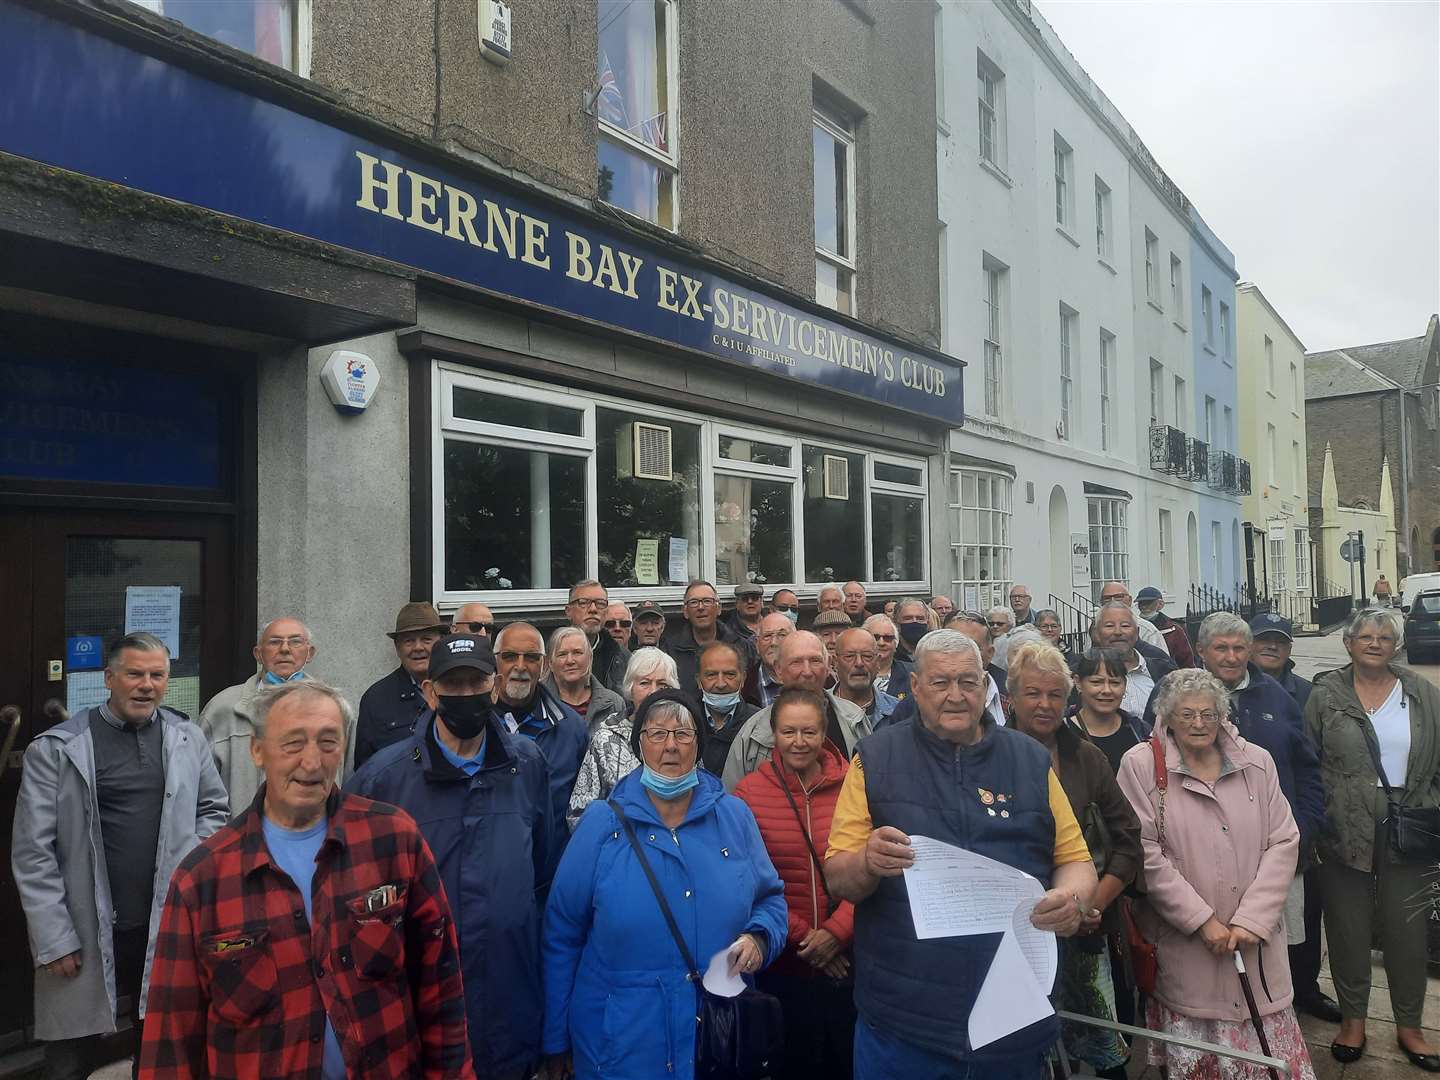 Dozens of members are hoping to save the Ex-Servicemen's Club in Herne Bay